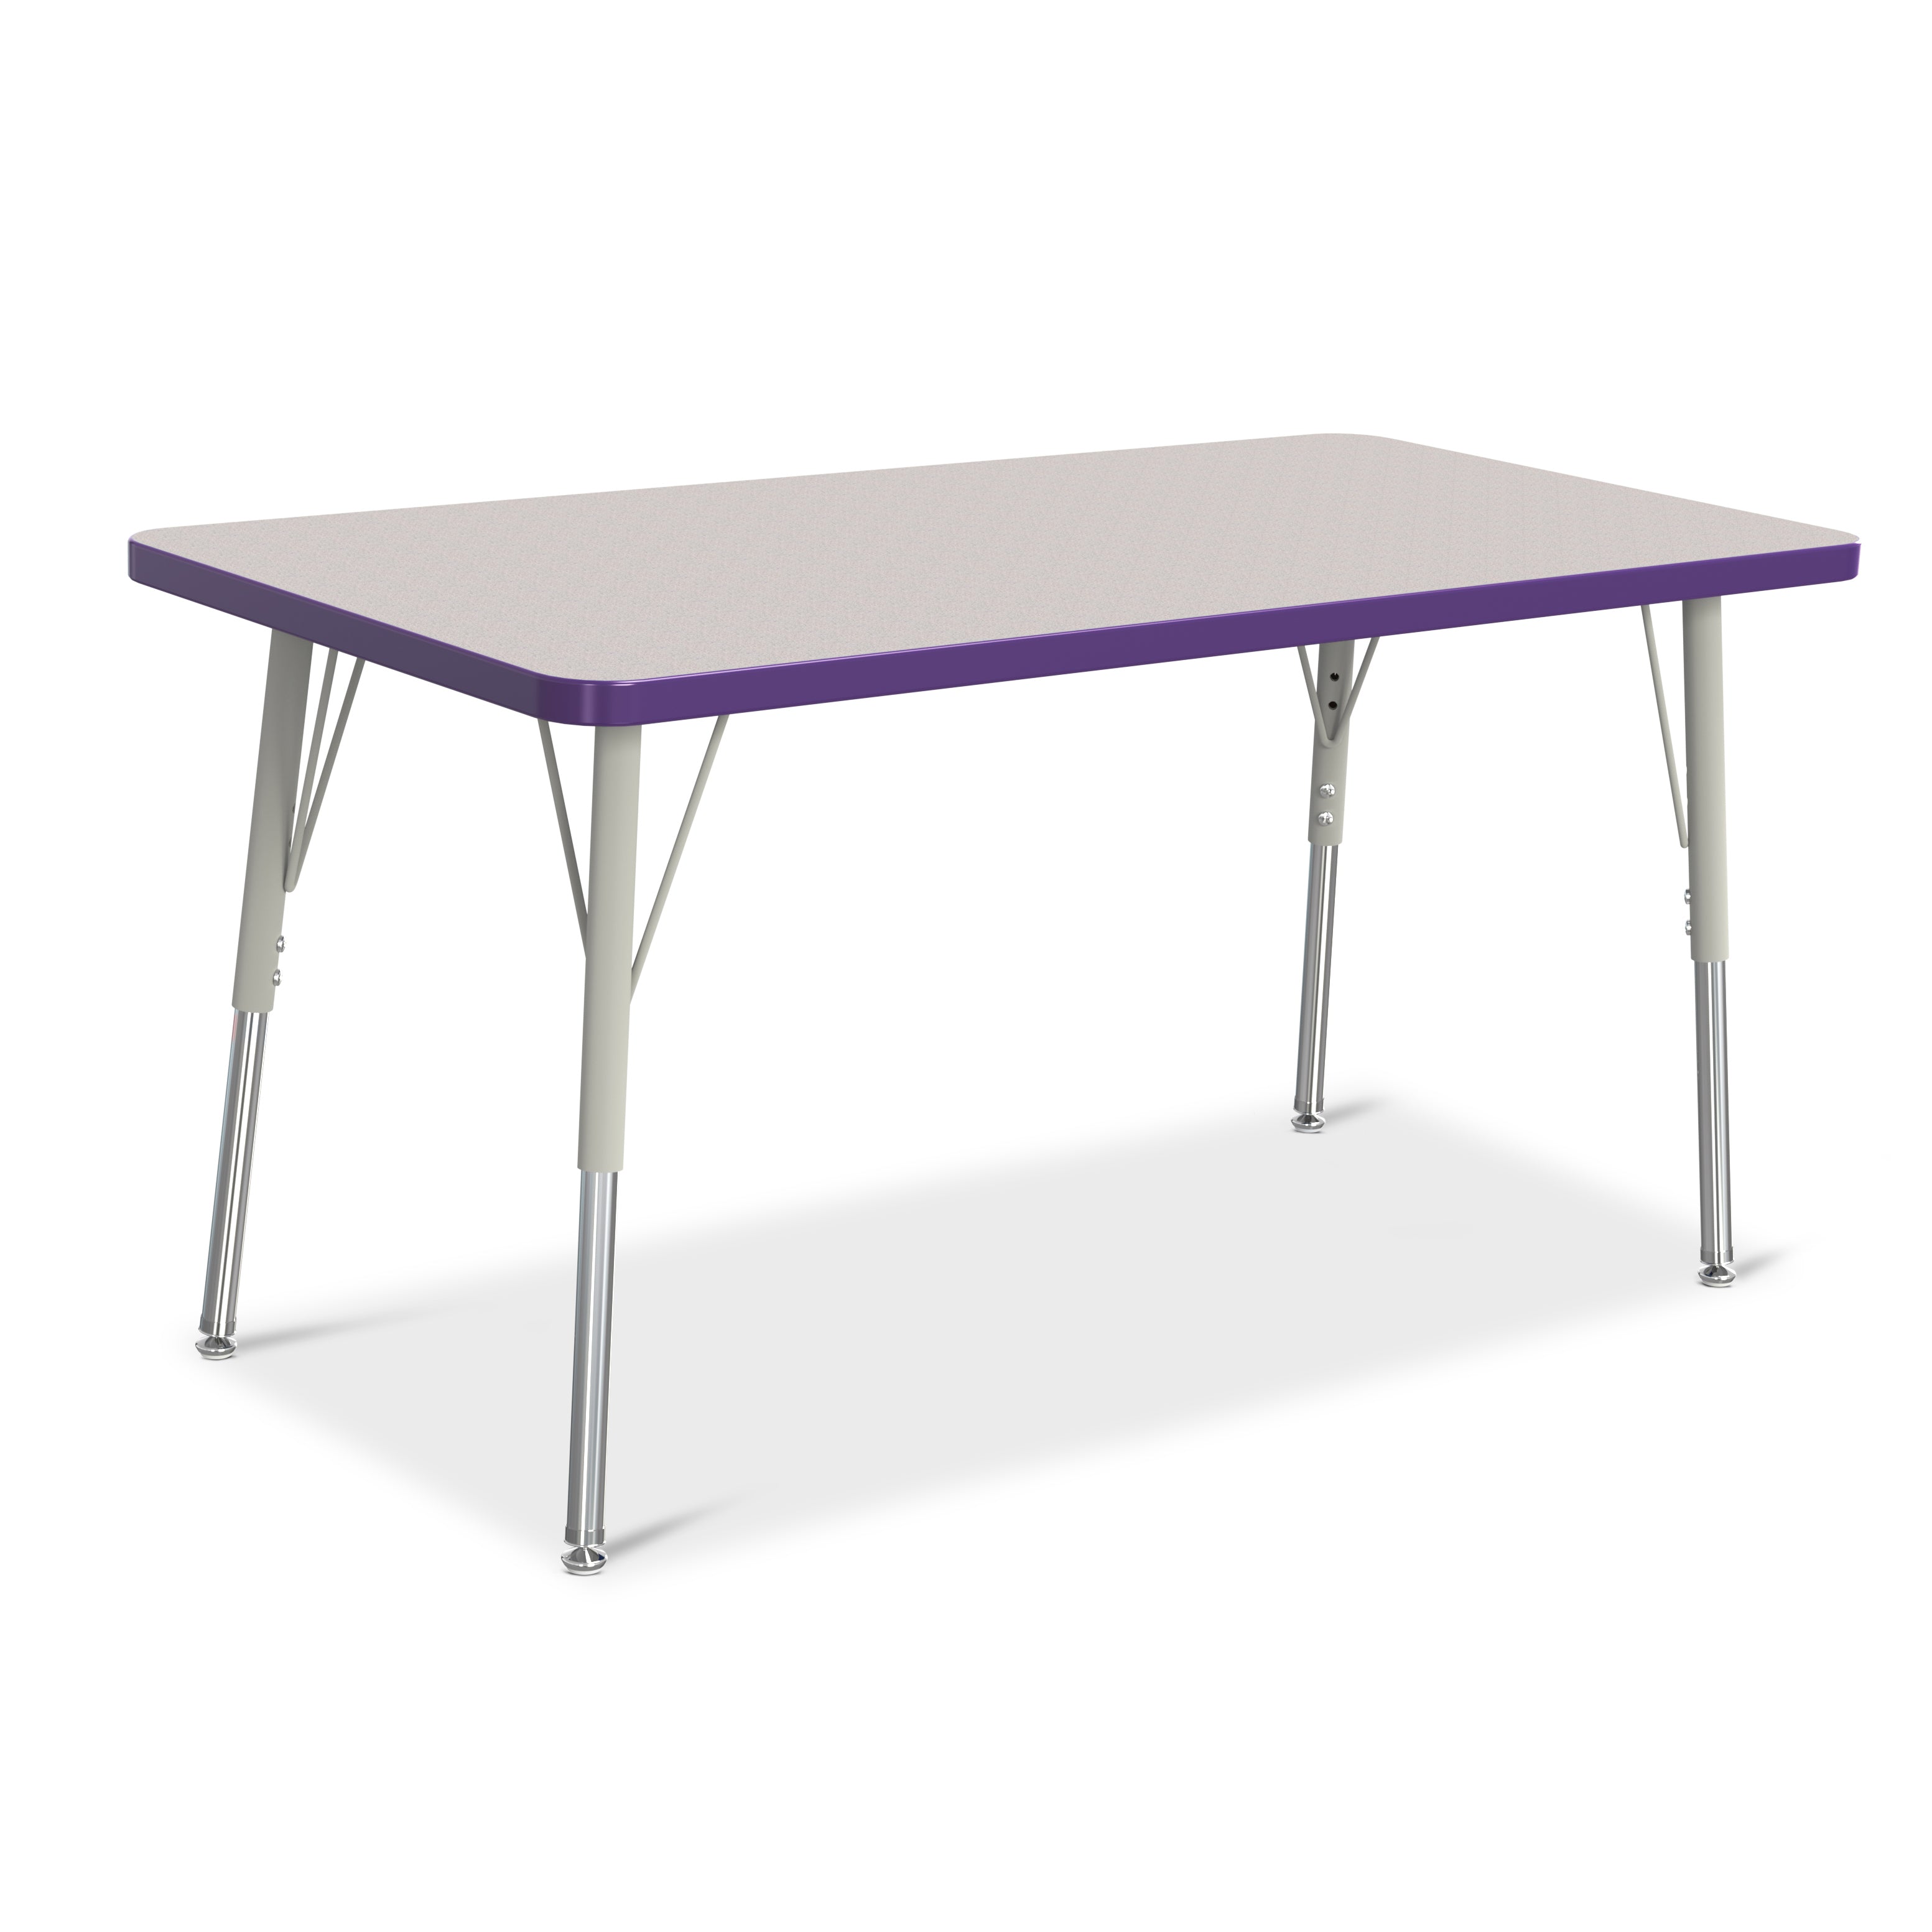 6403JCA004, Berries Rectangle Activity Table - 24" X 48", A-height - Freckled Gray/Purple/Gray